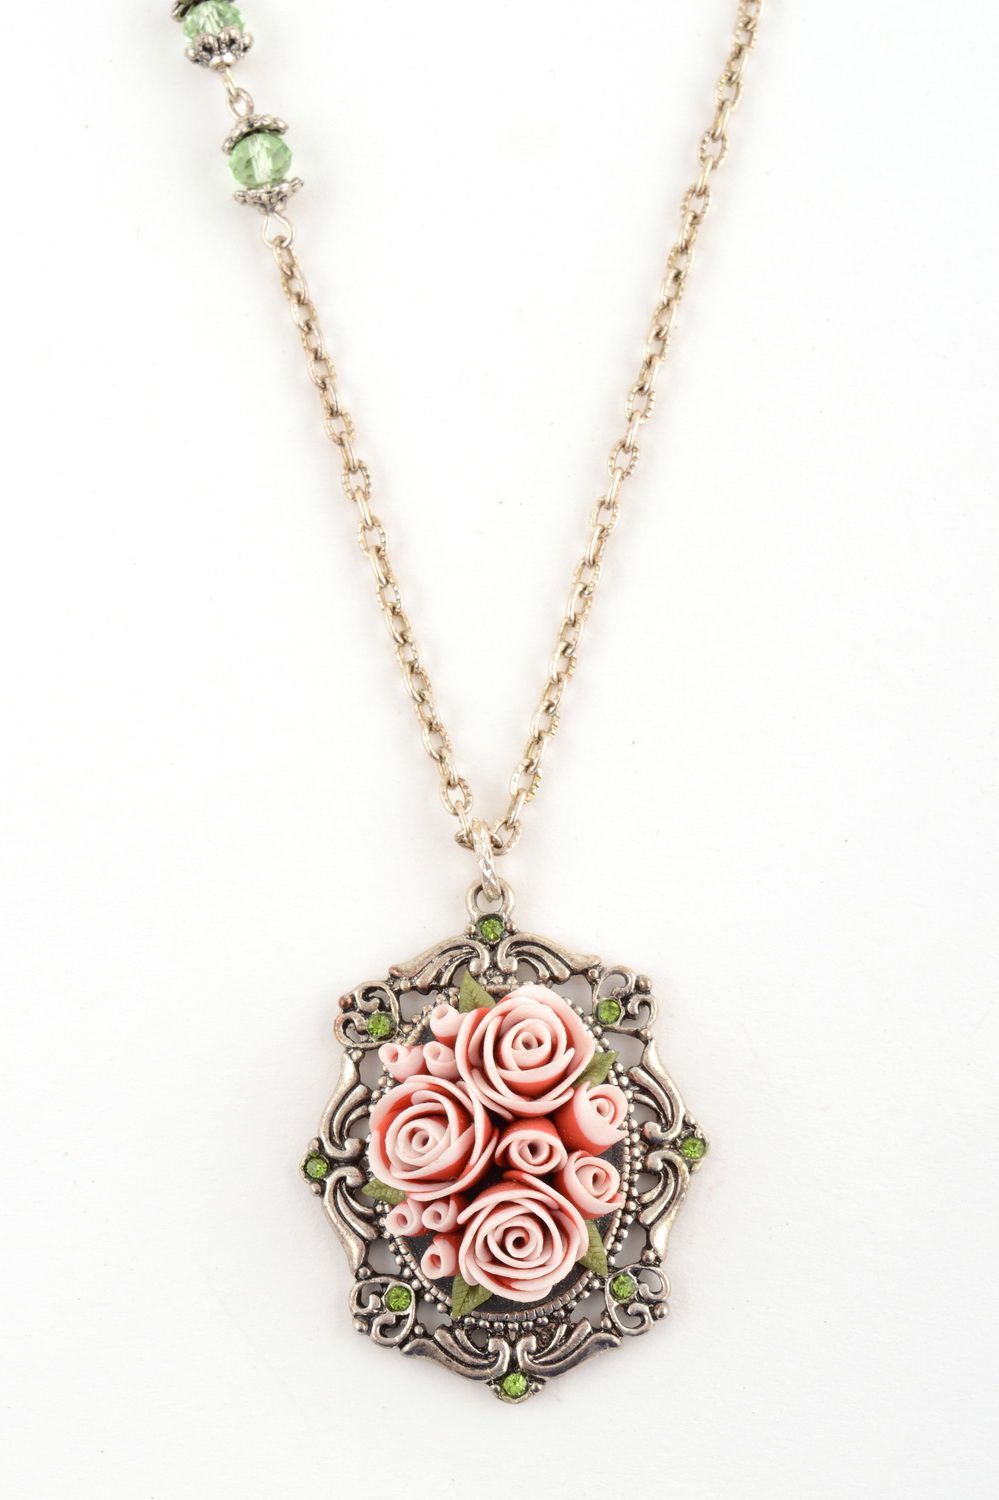 Handmade stylish pendant made of polymer clay on chain with volume roses photo 2